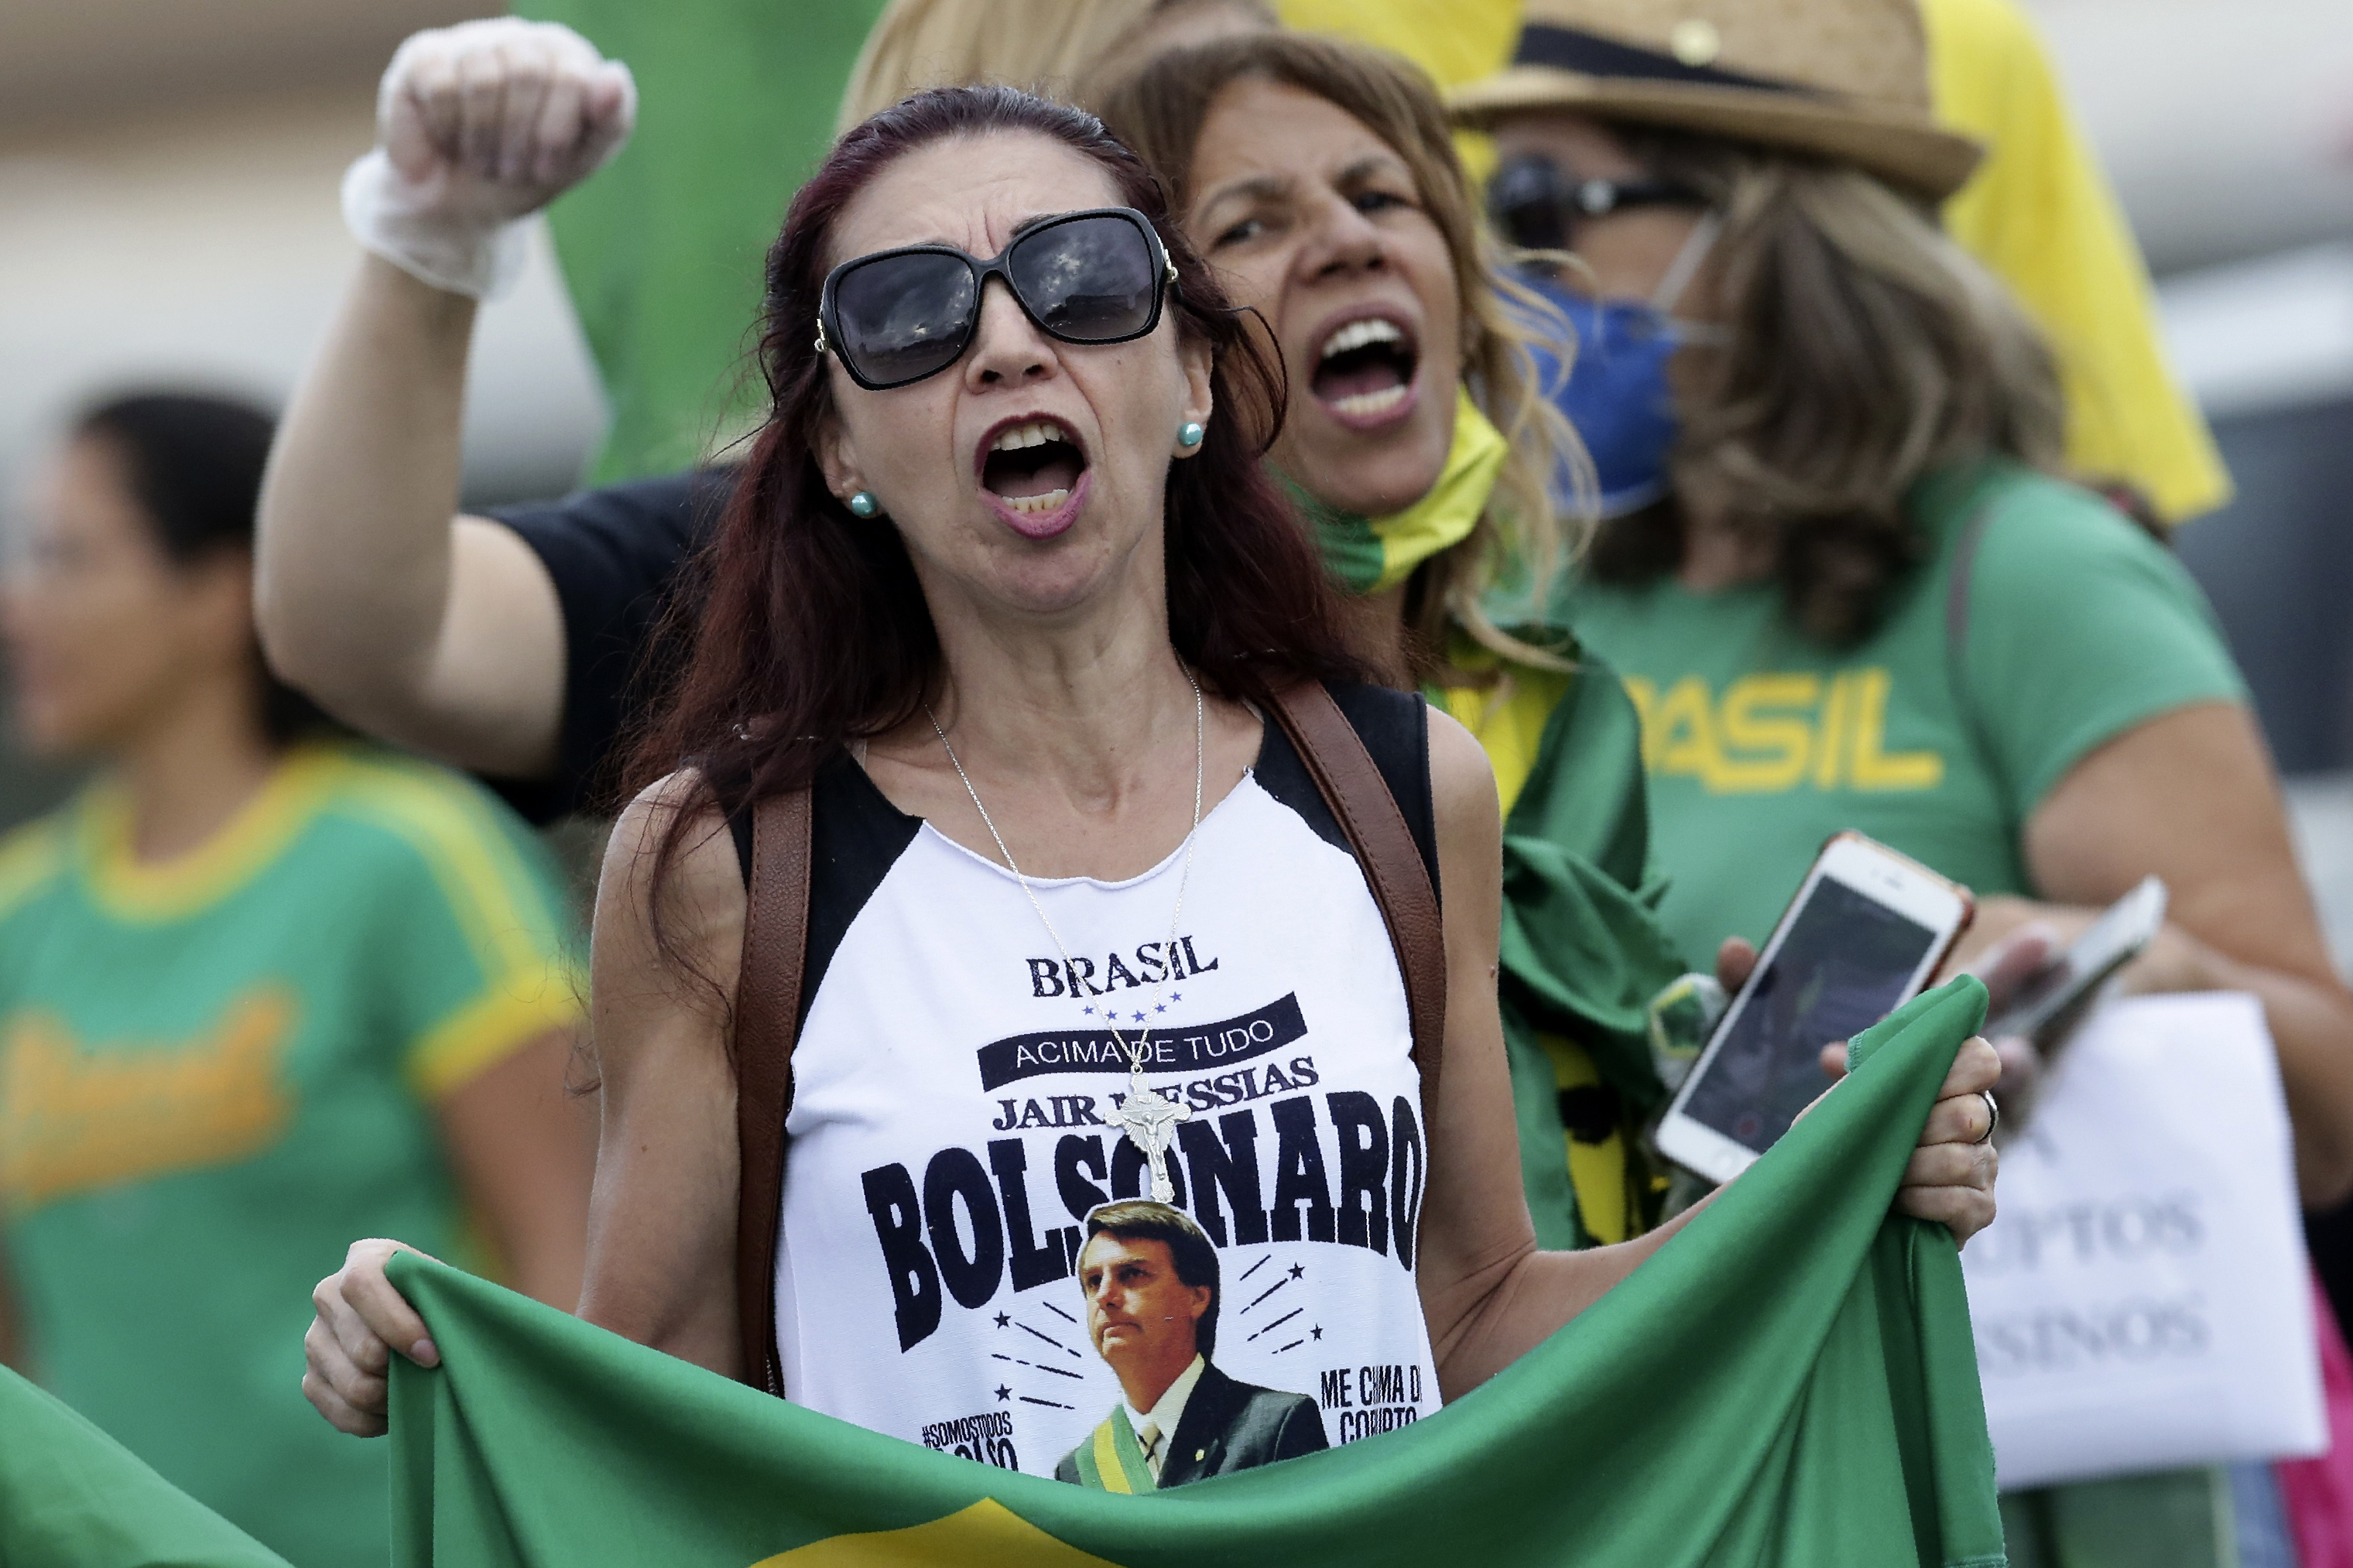 Demonstrators shout slogans against Congreess and the Supreme Court during a protest demanding military intervention during the new coronavirus emergency, in front of the National Congress, in Brasilia, Brazil, Monday, April 20, 2020. (AP Photo/Eraldo Peres)